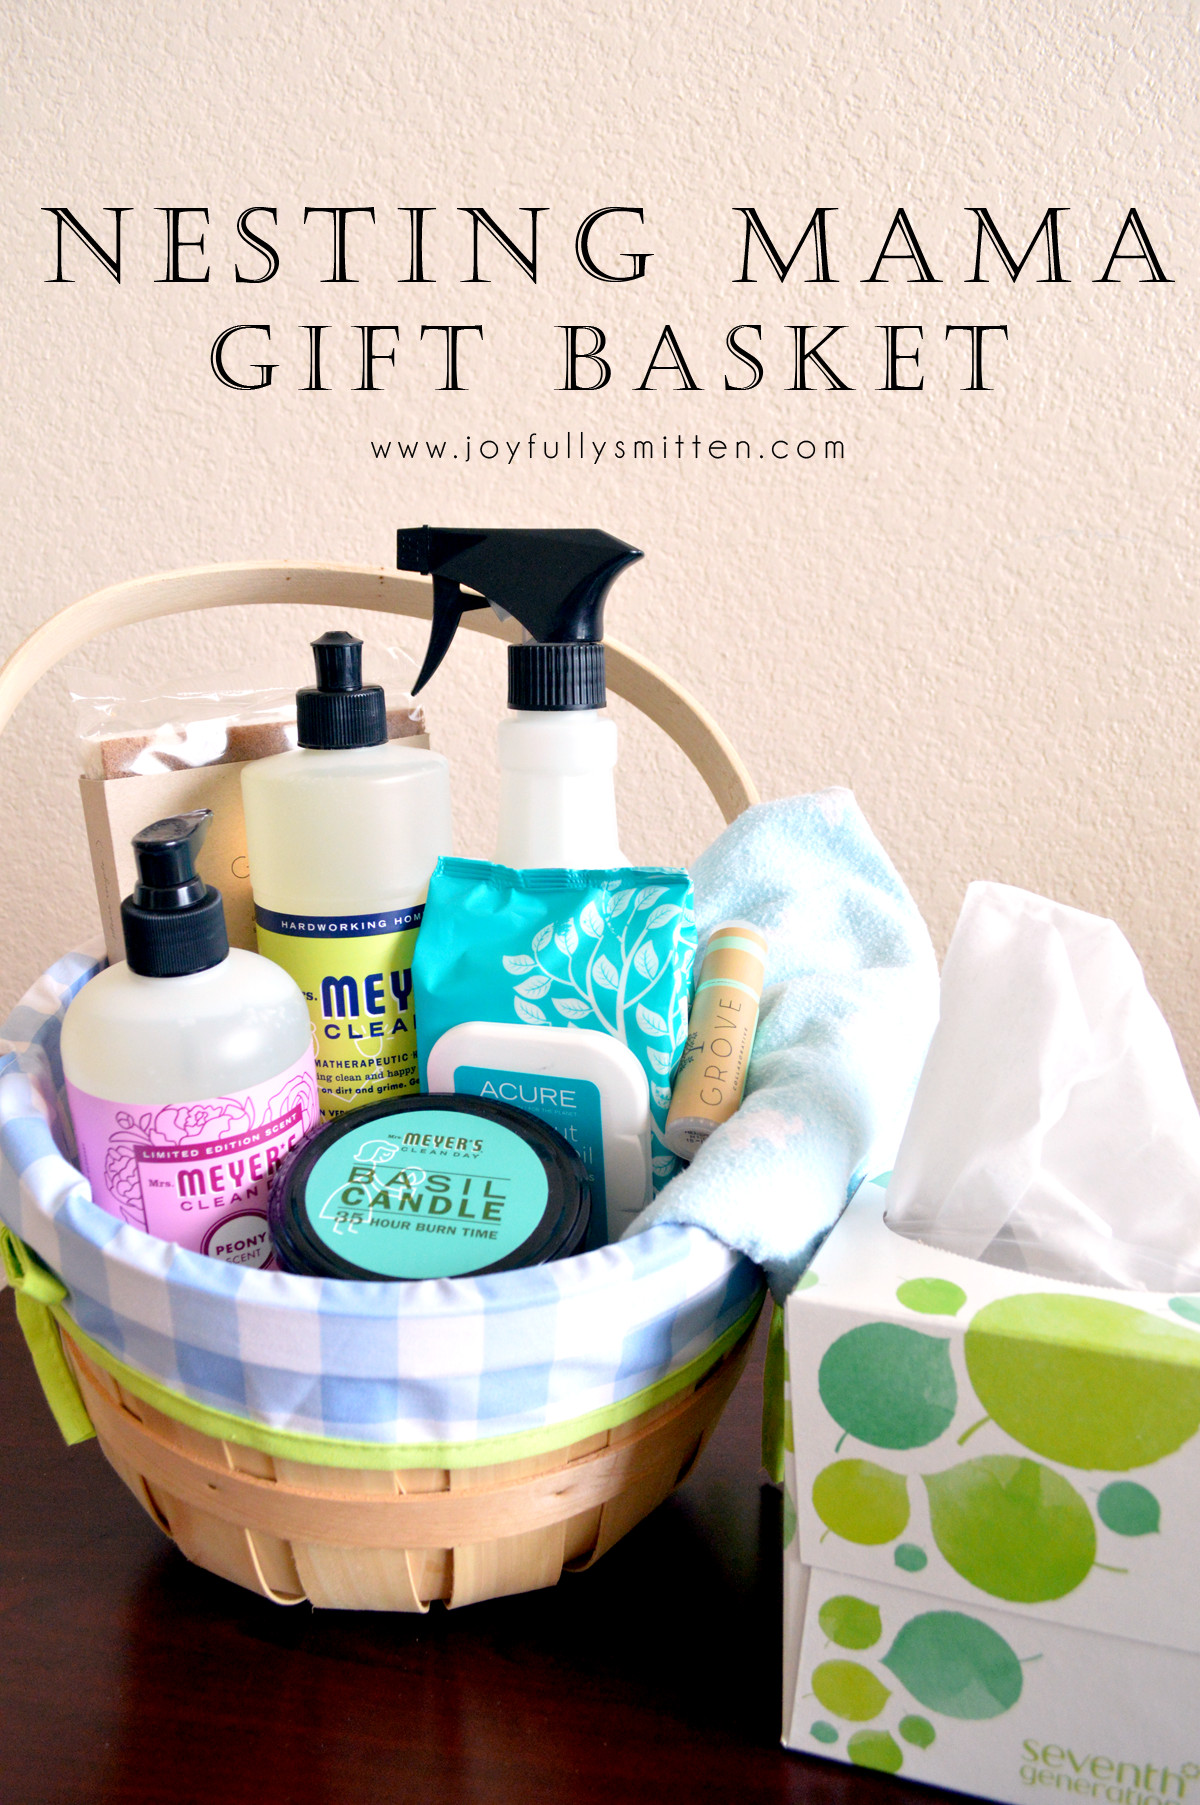 Gift Ideas For An Expecting Mother
 DIY Nesting Mama Gift Basket